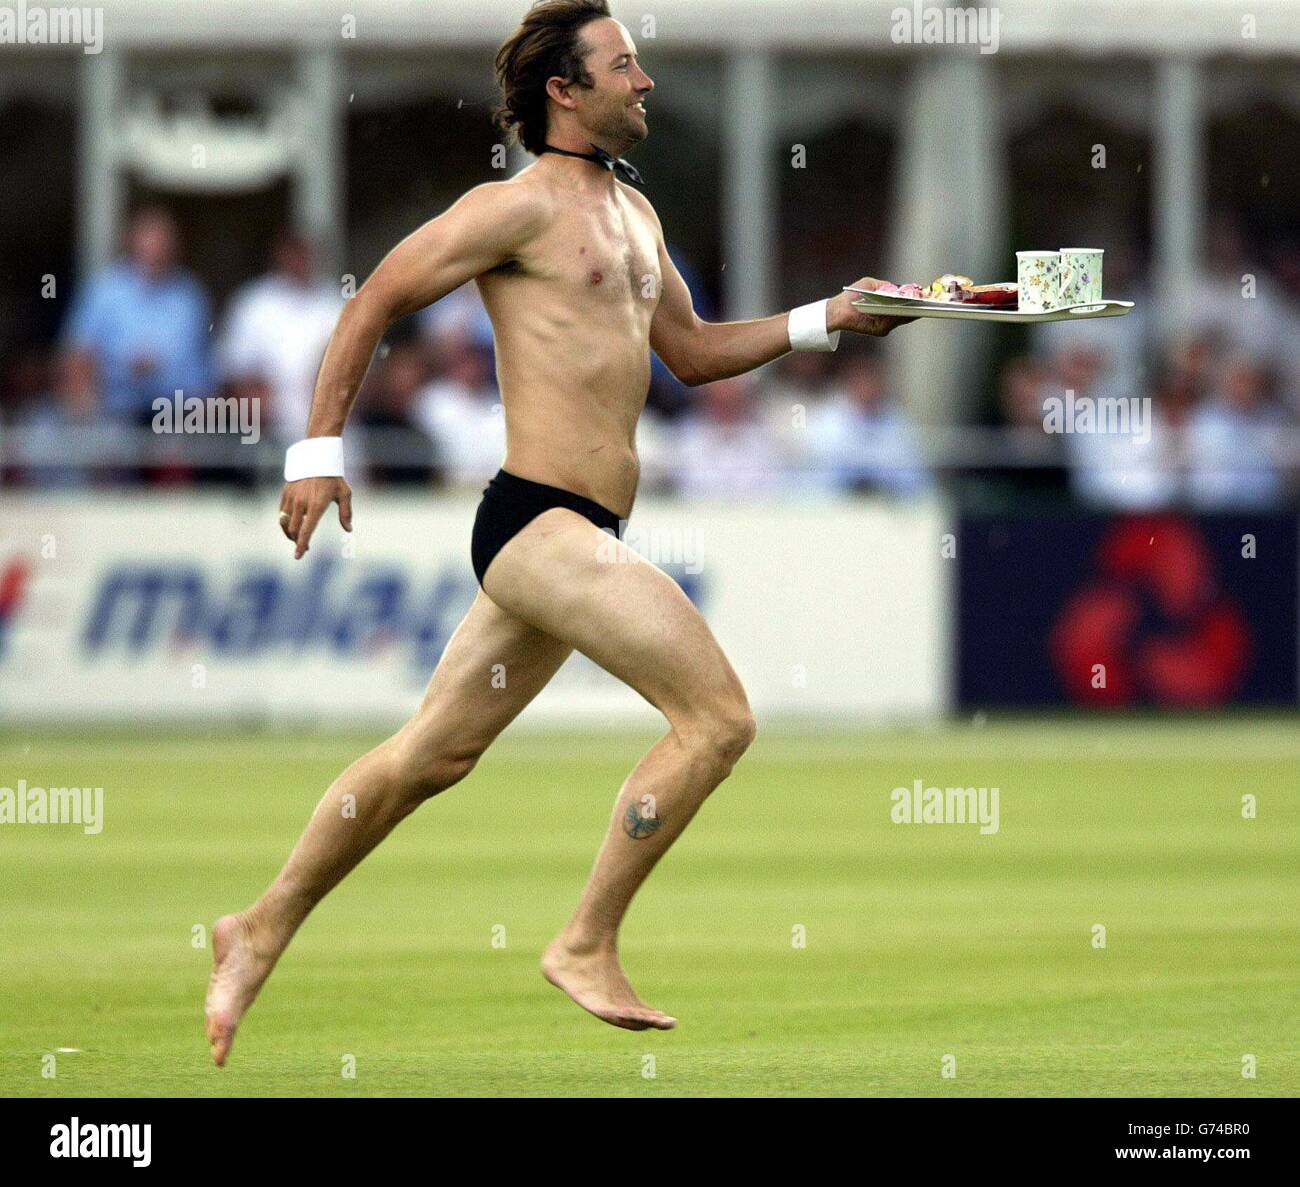 A streaker runs on the pitch holding a tea tray, during the first day of the third npower test against West Indies at Old Trafford, Manchester. Stock Photo